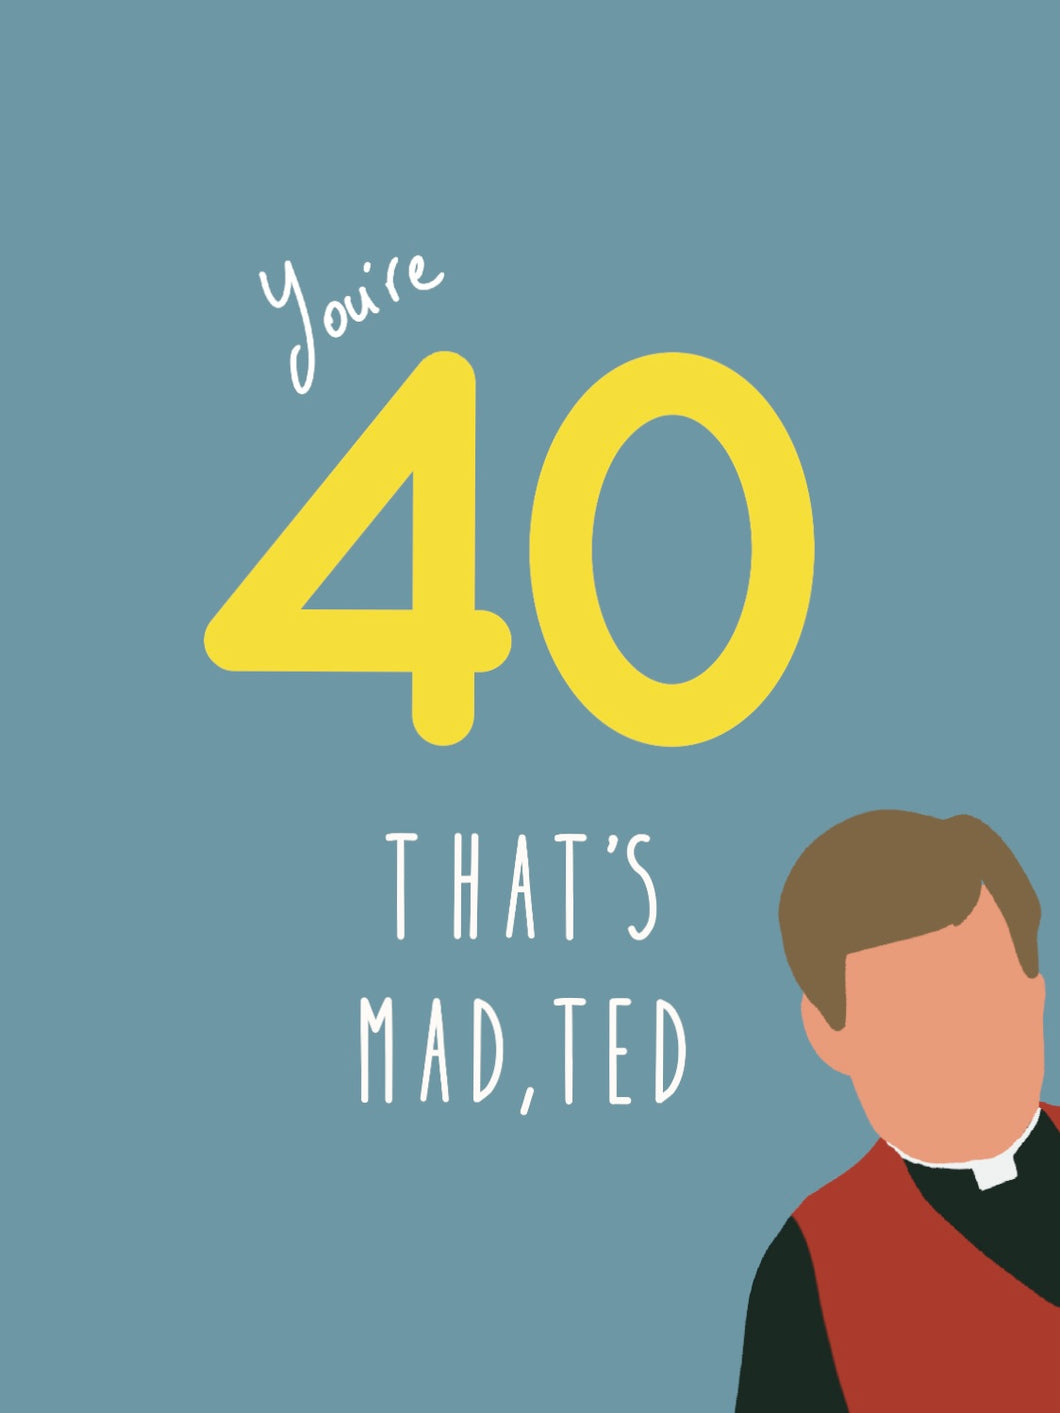 You're 40, that's mad, Ted!